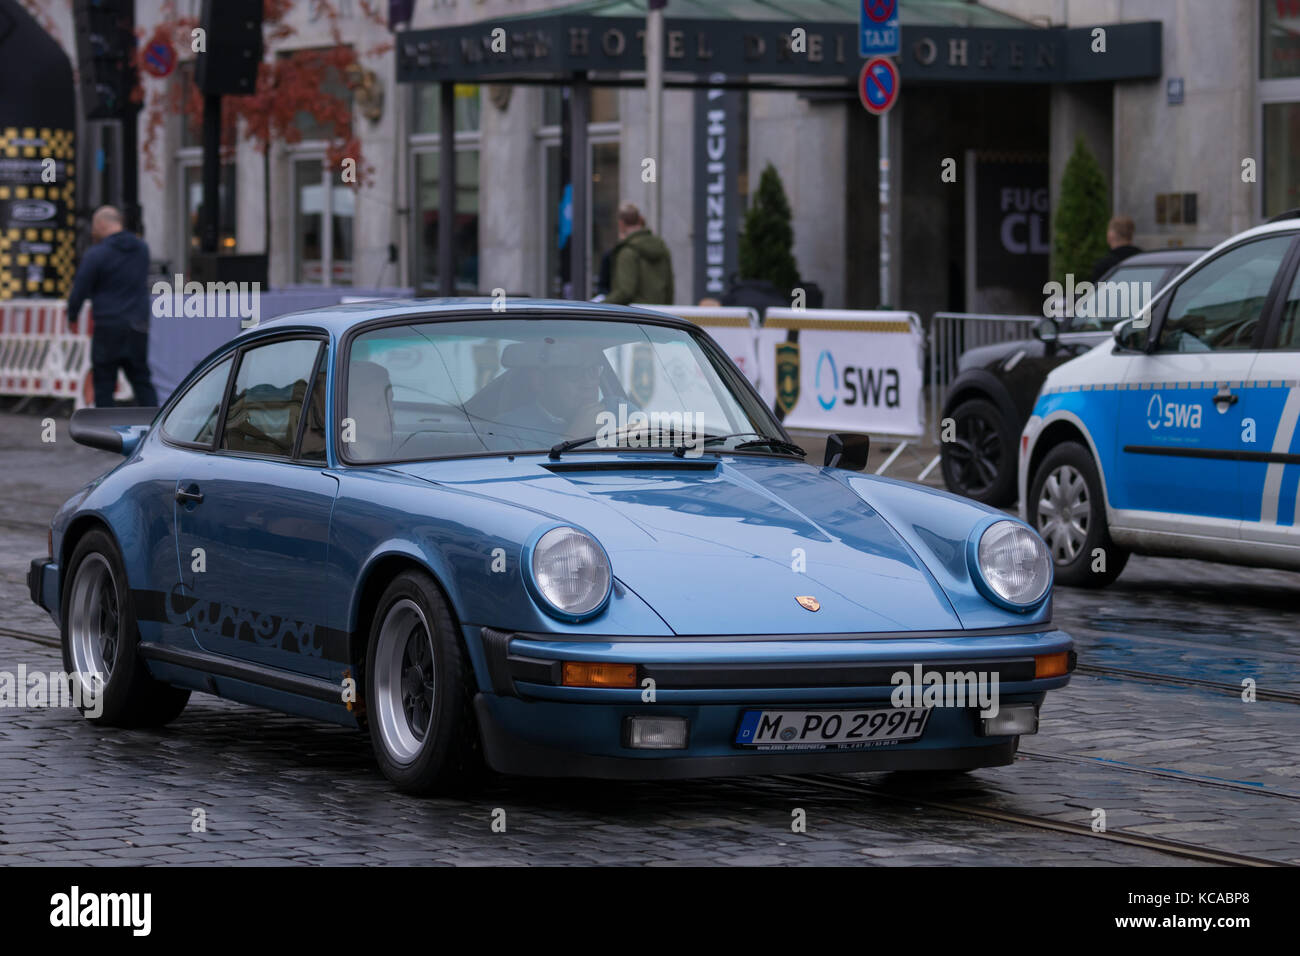 Augsburg, Germany - October 1, 2017: Porsche 911 oldtimer car at the Fuggerstadt Classic 2017 Oldtimer Rallye on October 1, 2017 in Augsburg, Germany. Stock Photo